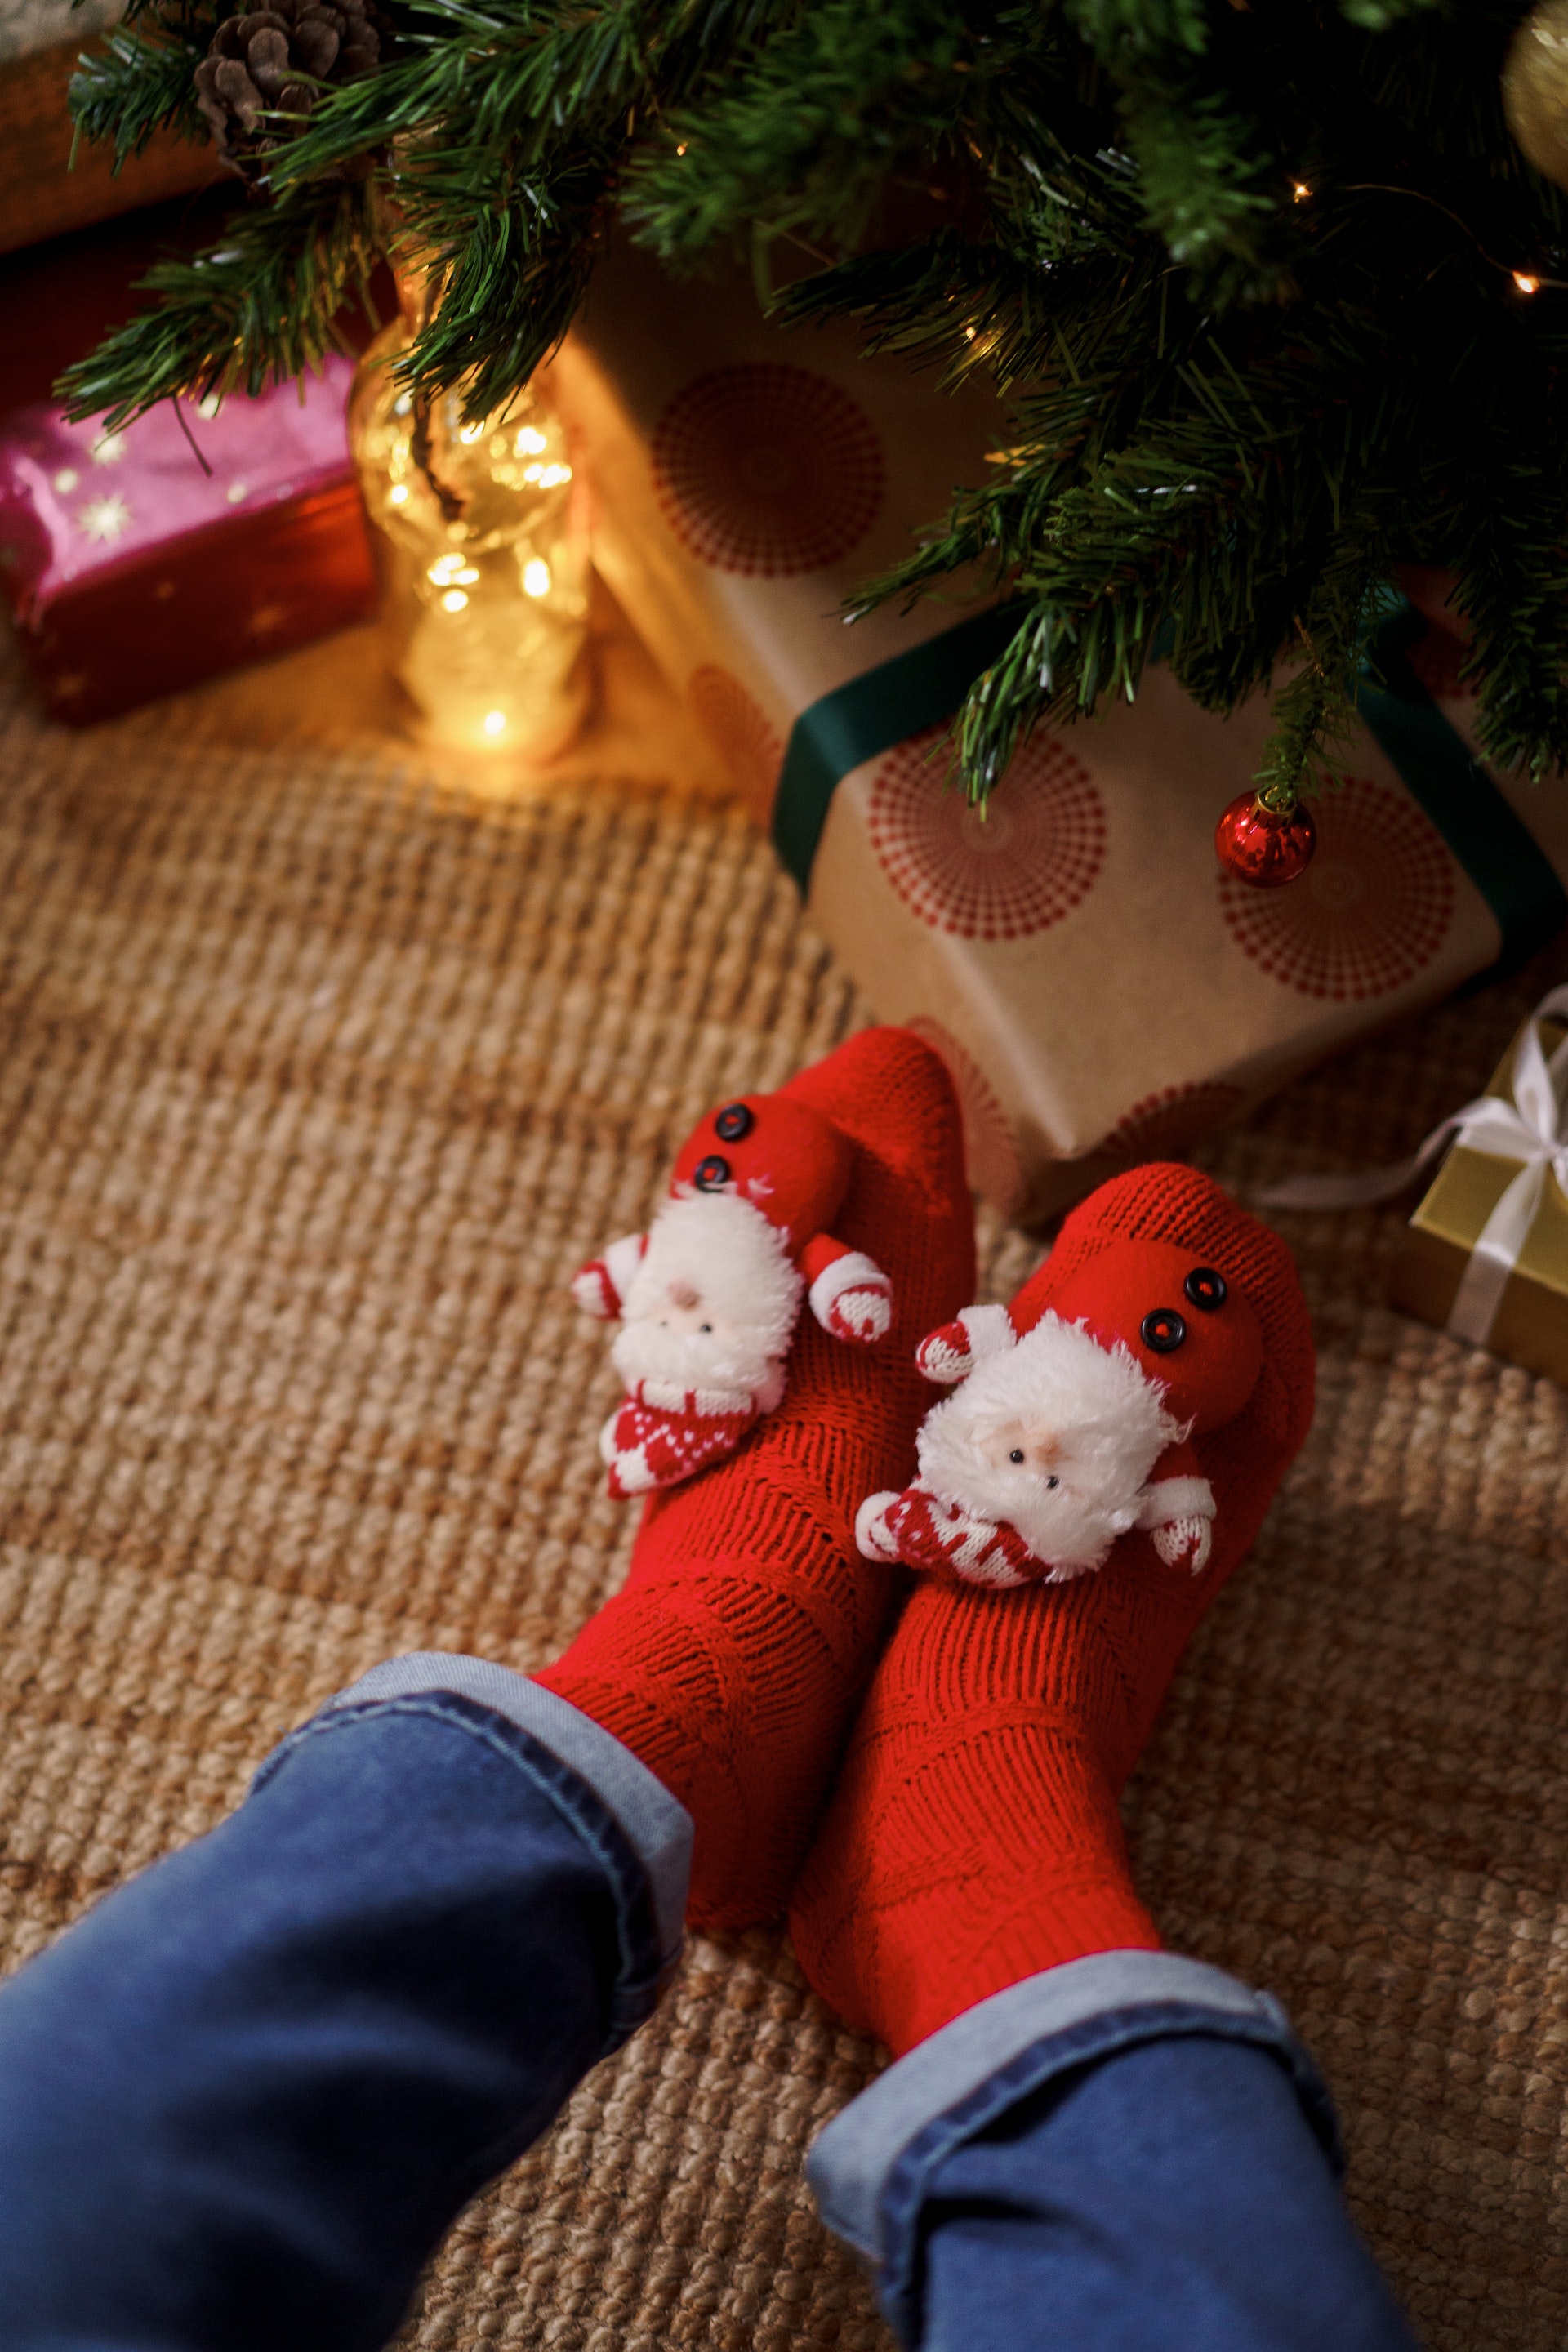 A person wearing Christmas-themed socks | Source: Pexels